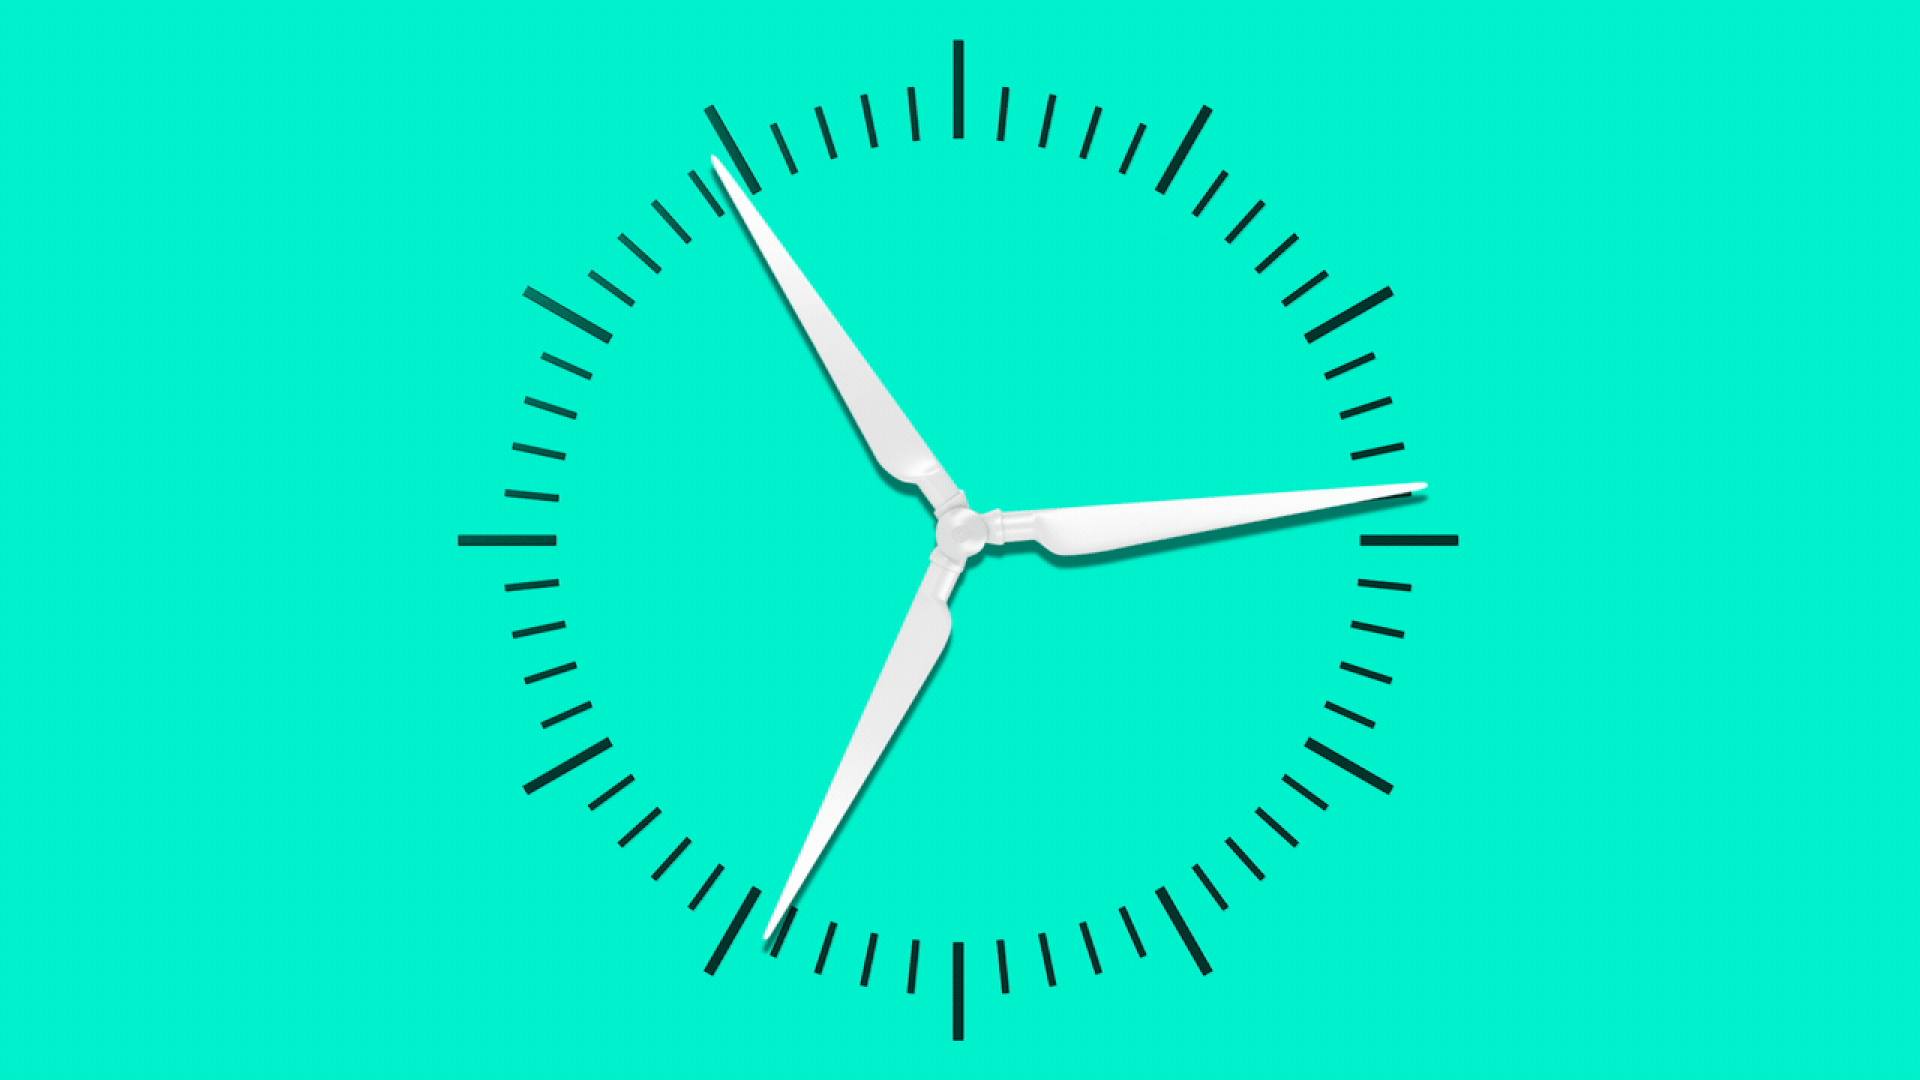 Animated illustration of a wind turbine rotating on a clock face.